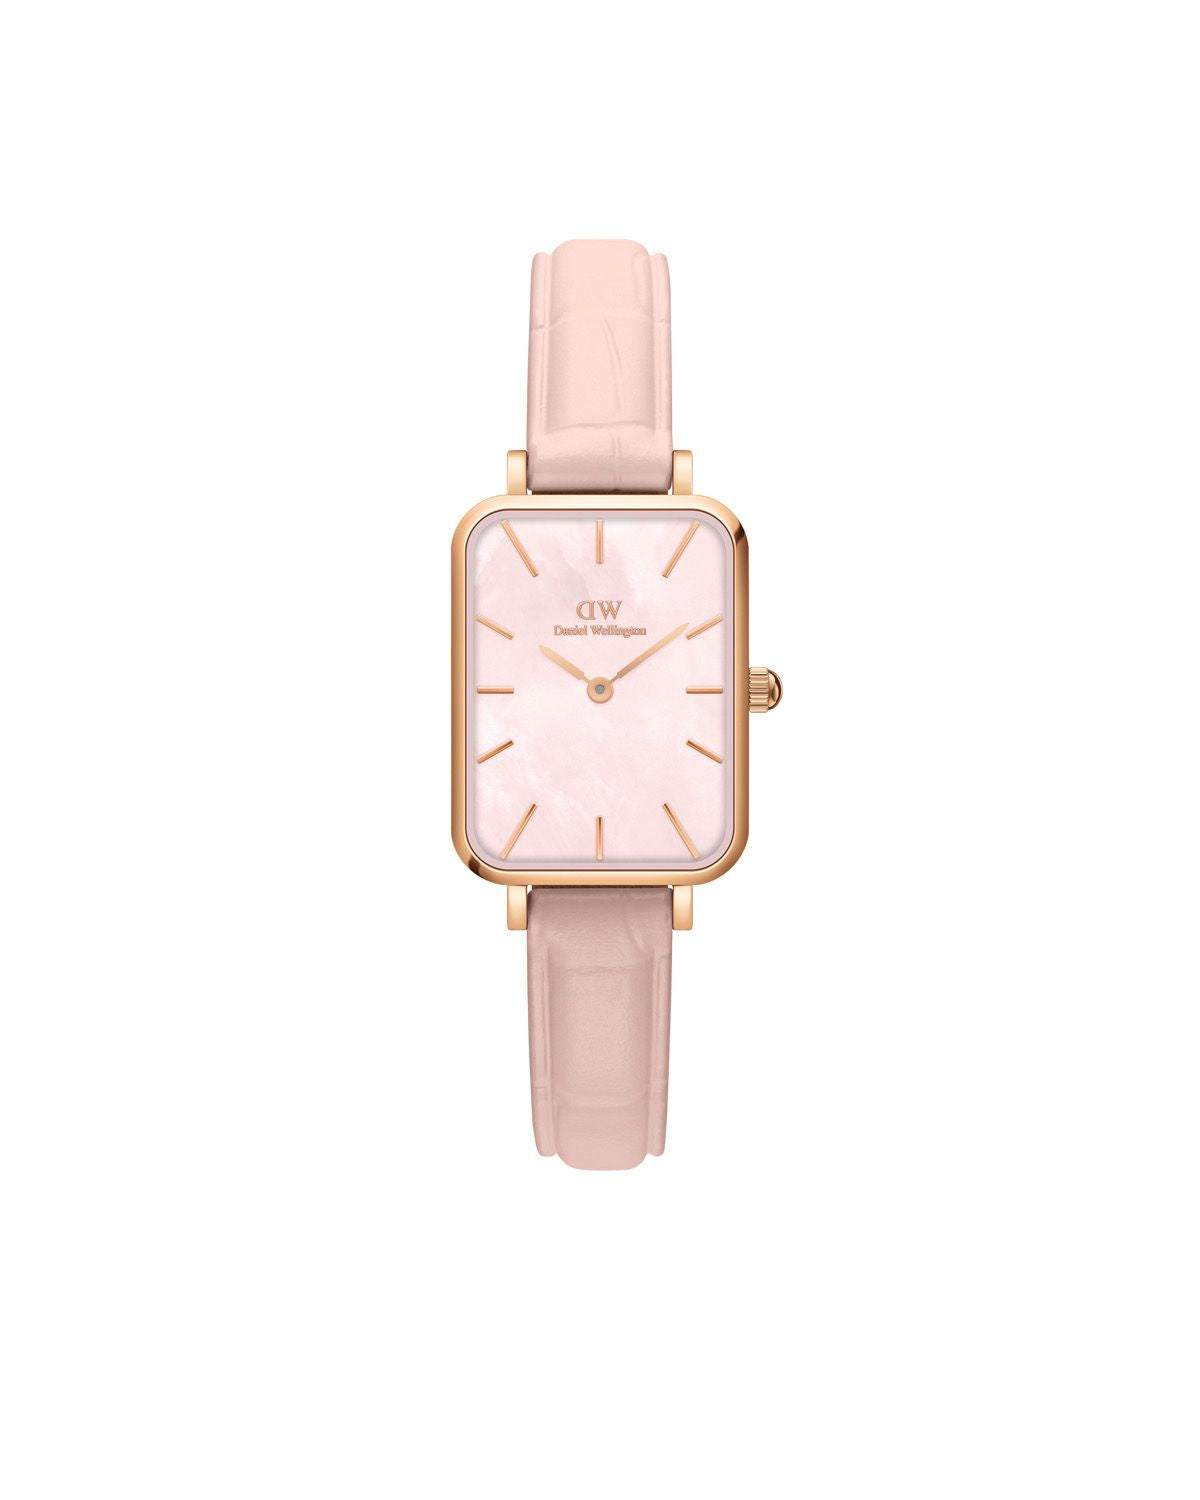 Daniel Wellington 'Quadro Pressed Rouge' Rose and Pink Watch